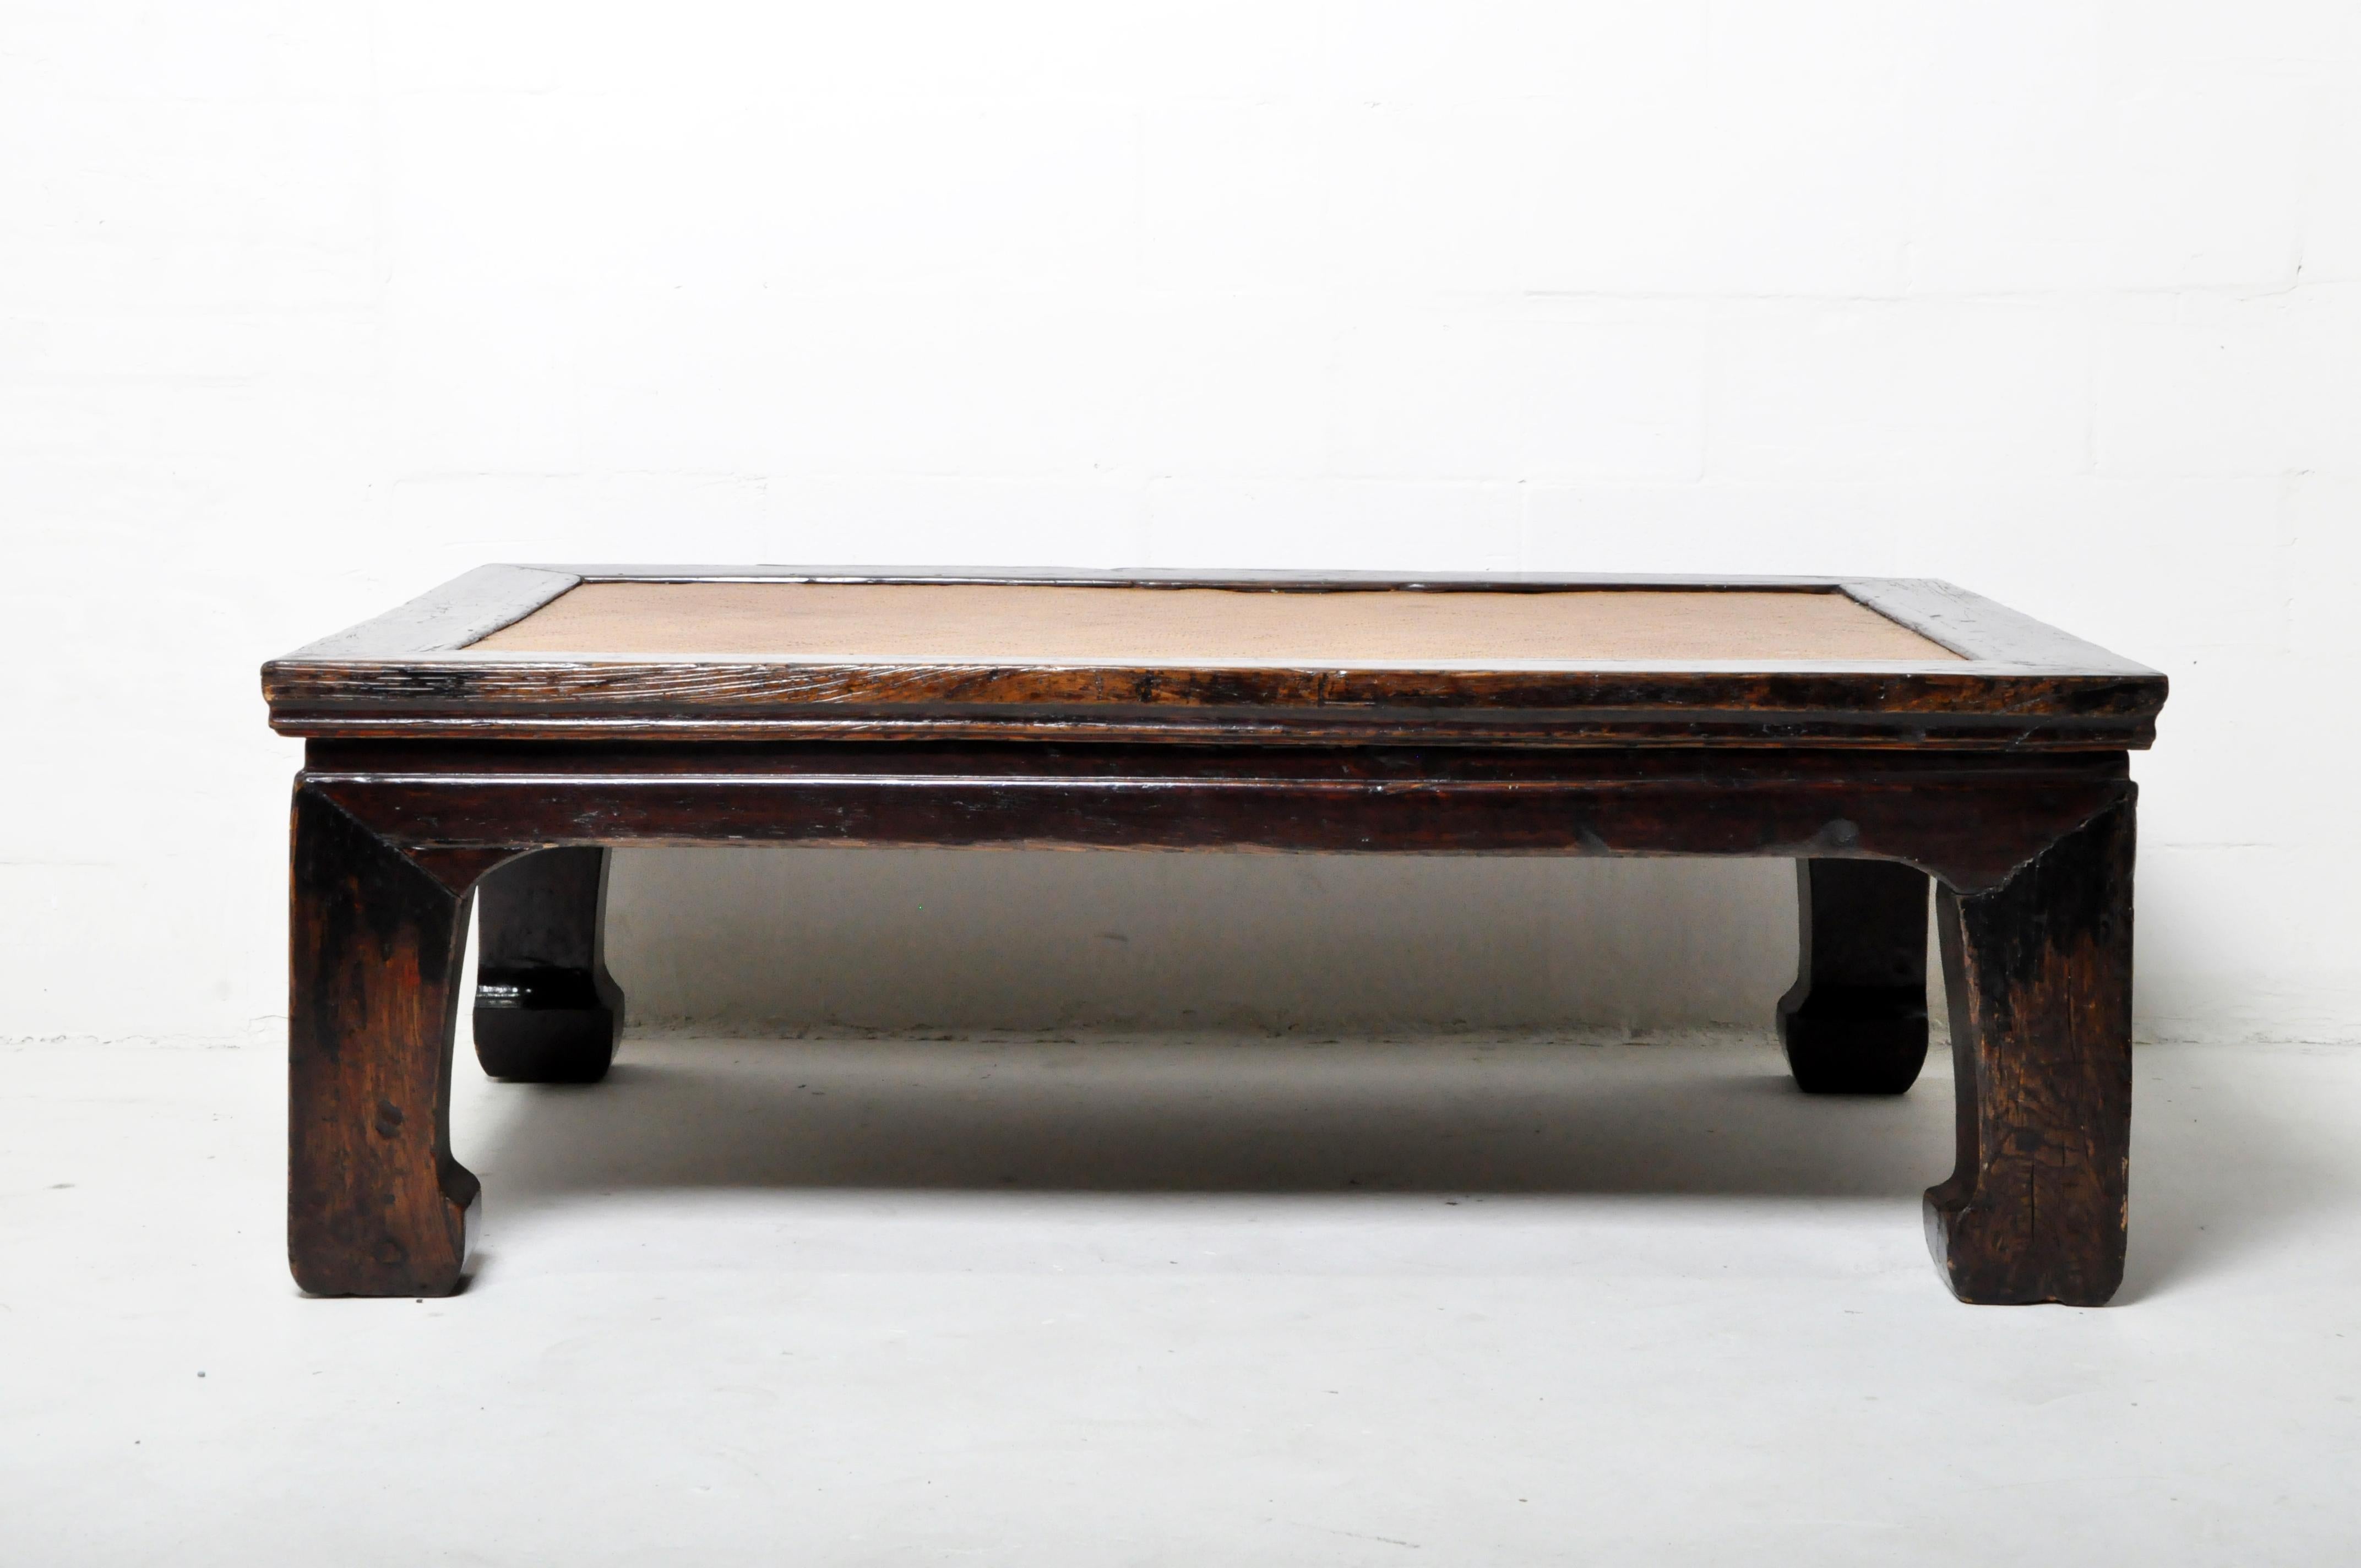 This classic northern Chinese daybed has been cut down in length to make a unique coffee table. The finely woven cane top is supported by tautly stretched jute cord webbing, using the original holes in the frame. The heavy elmwood legs and top frame